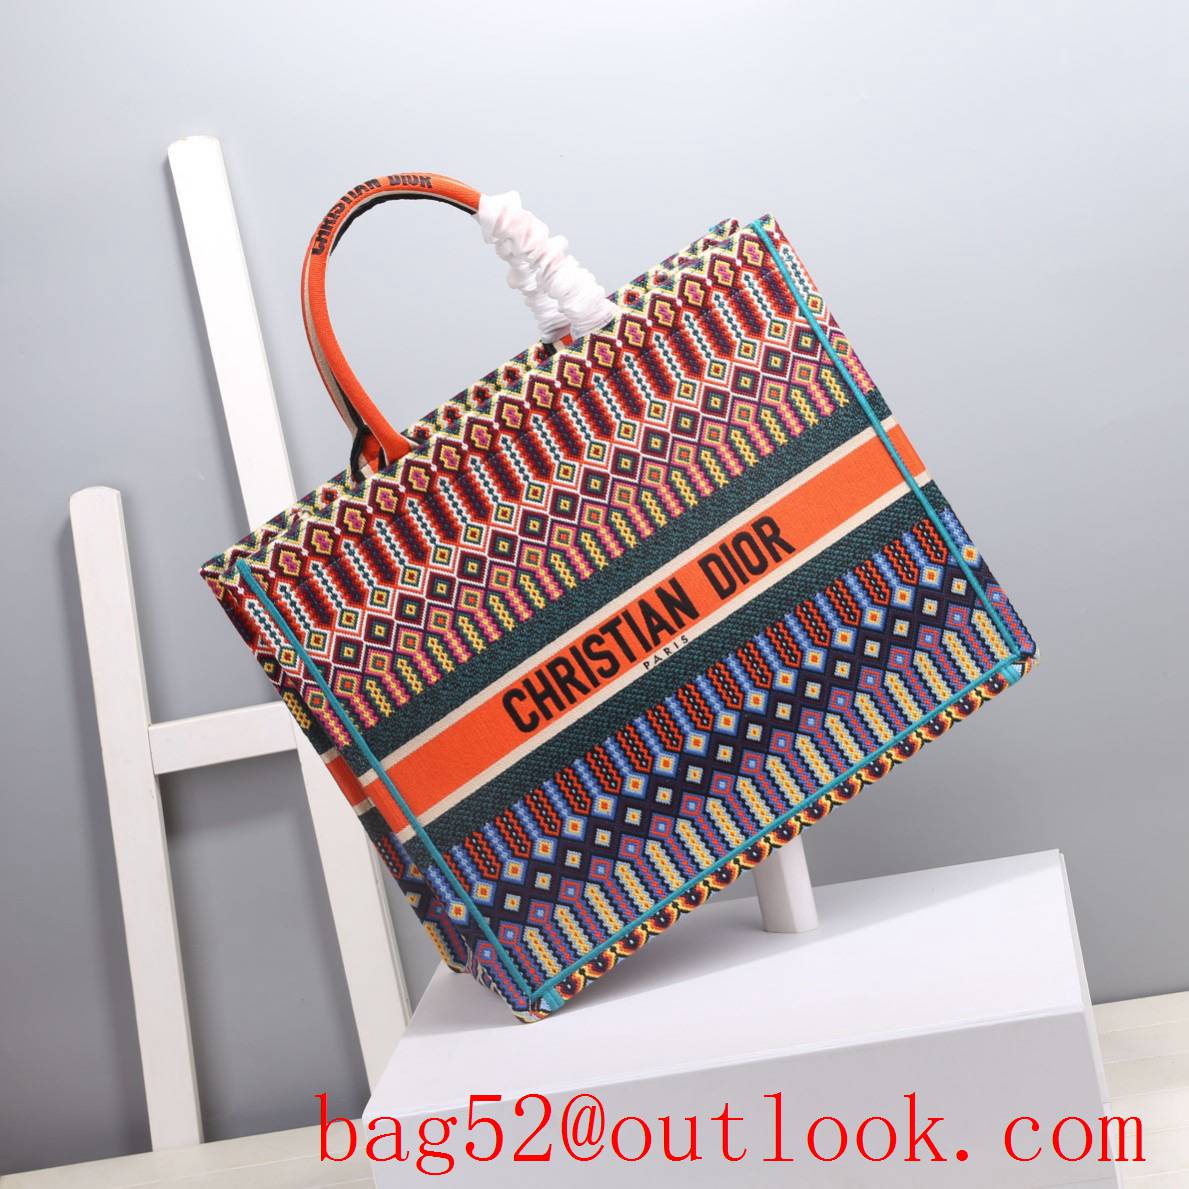 Dior retro book tote large mixcolor pattern bag